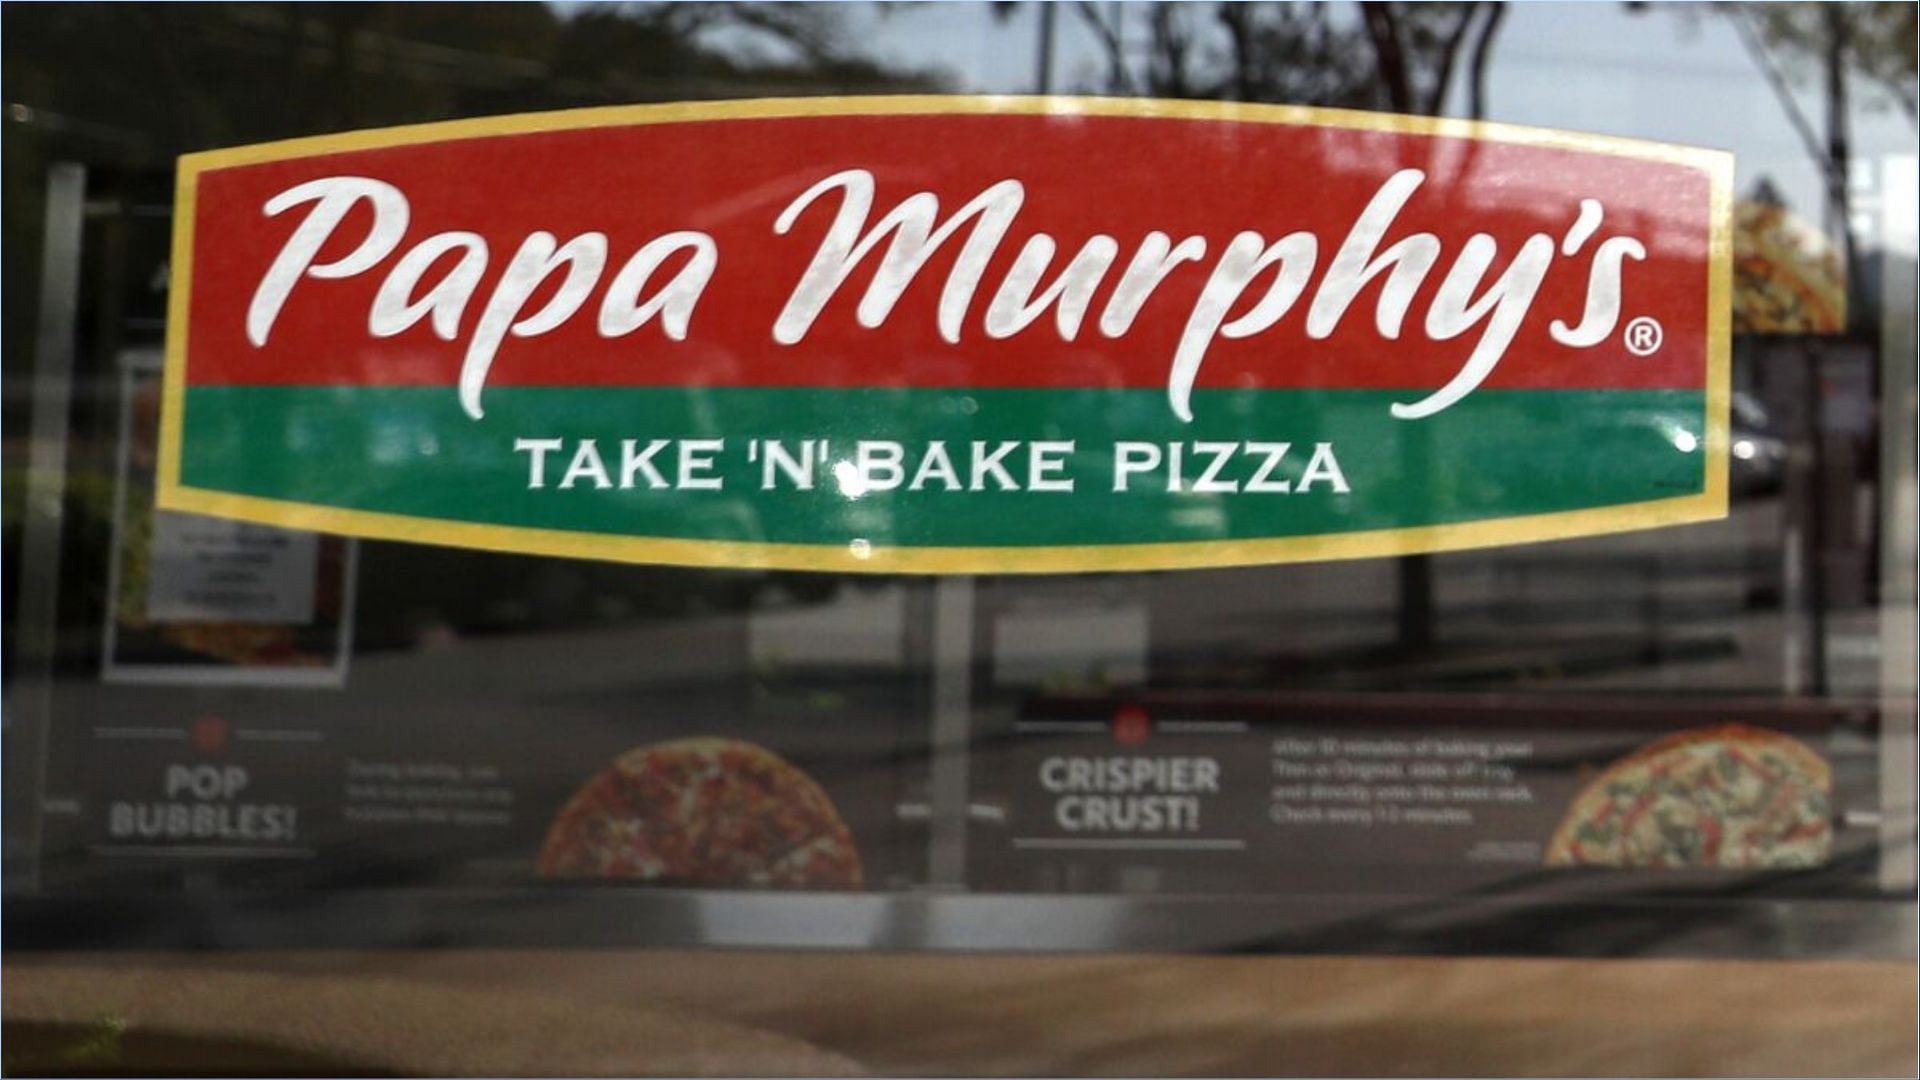 Raw cookie dough sold at Papa Murphy&rsquo;s Take &lsquo;N&rsquo; Bake pizza stores feared to be contaminated with Salmonella (Image via Justin Sullivan / Getty Images)